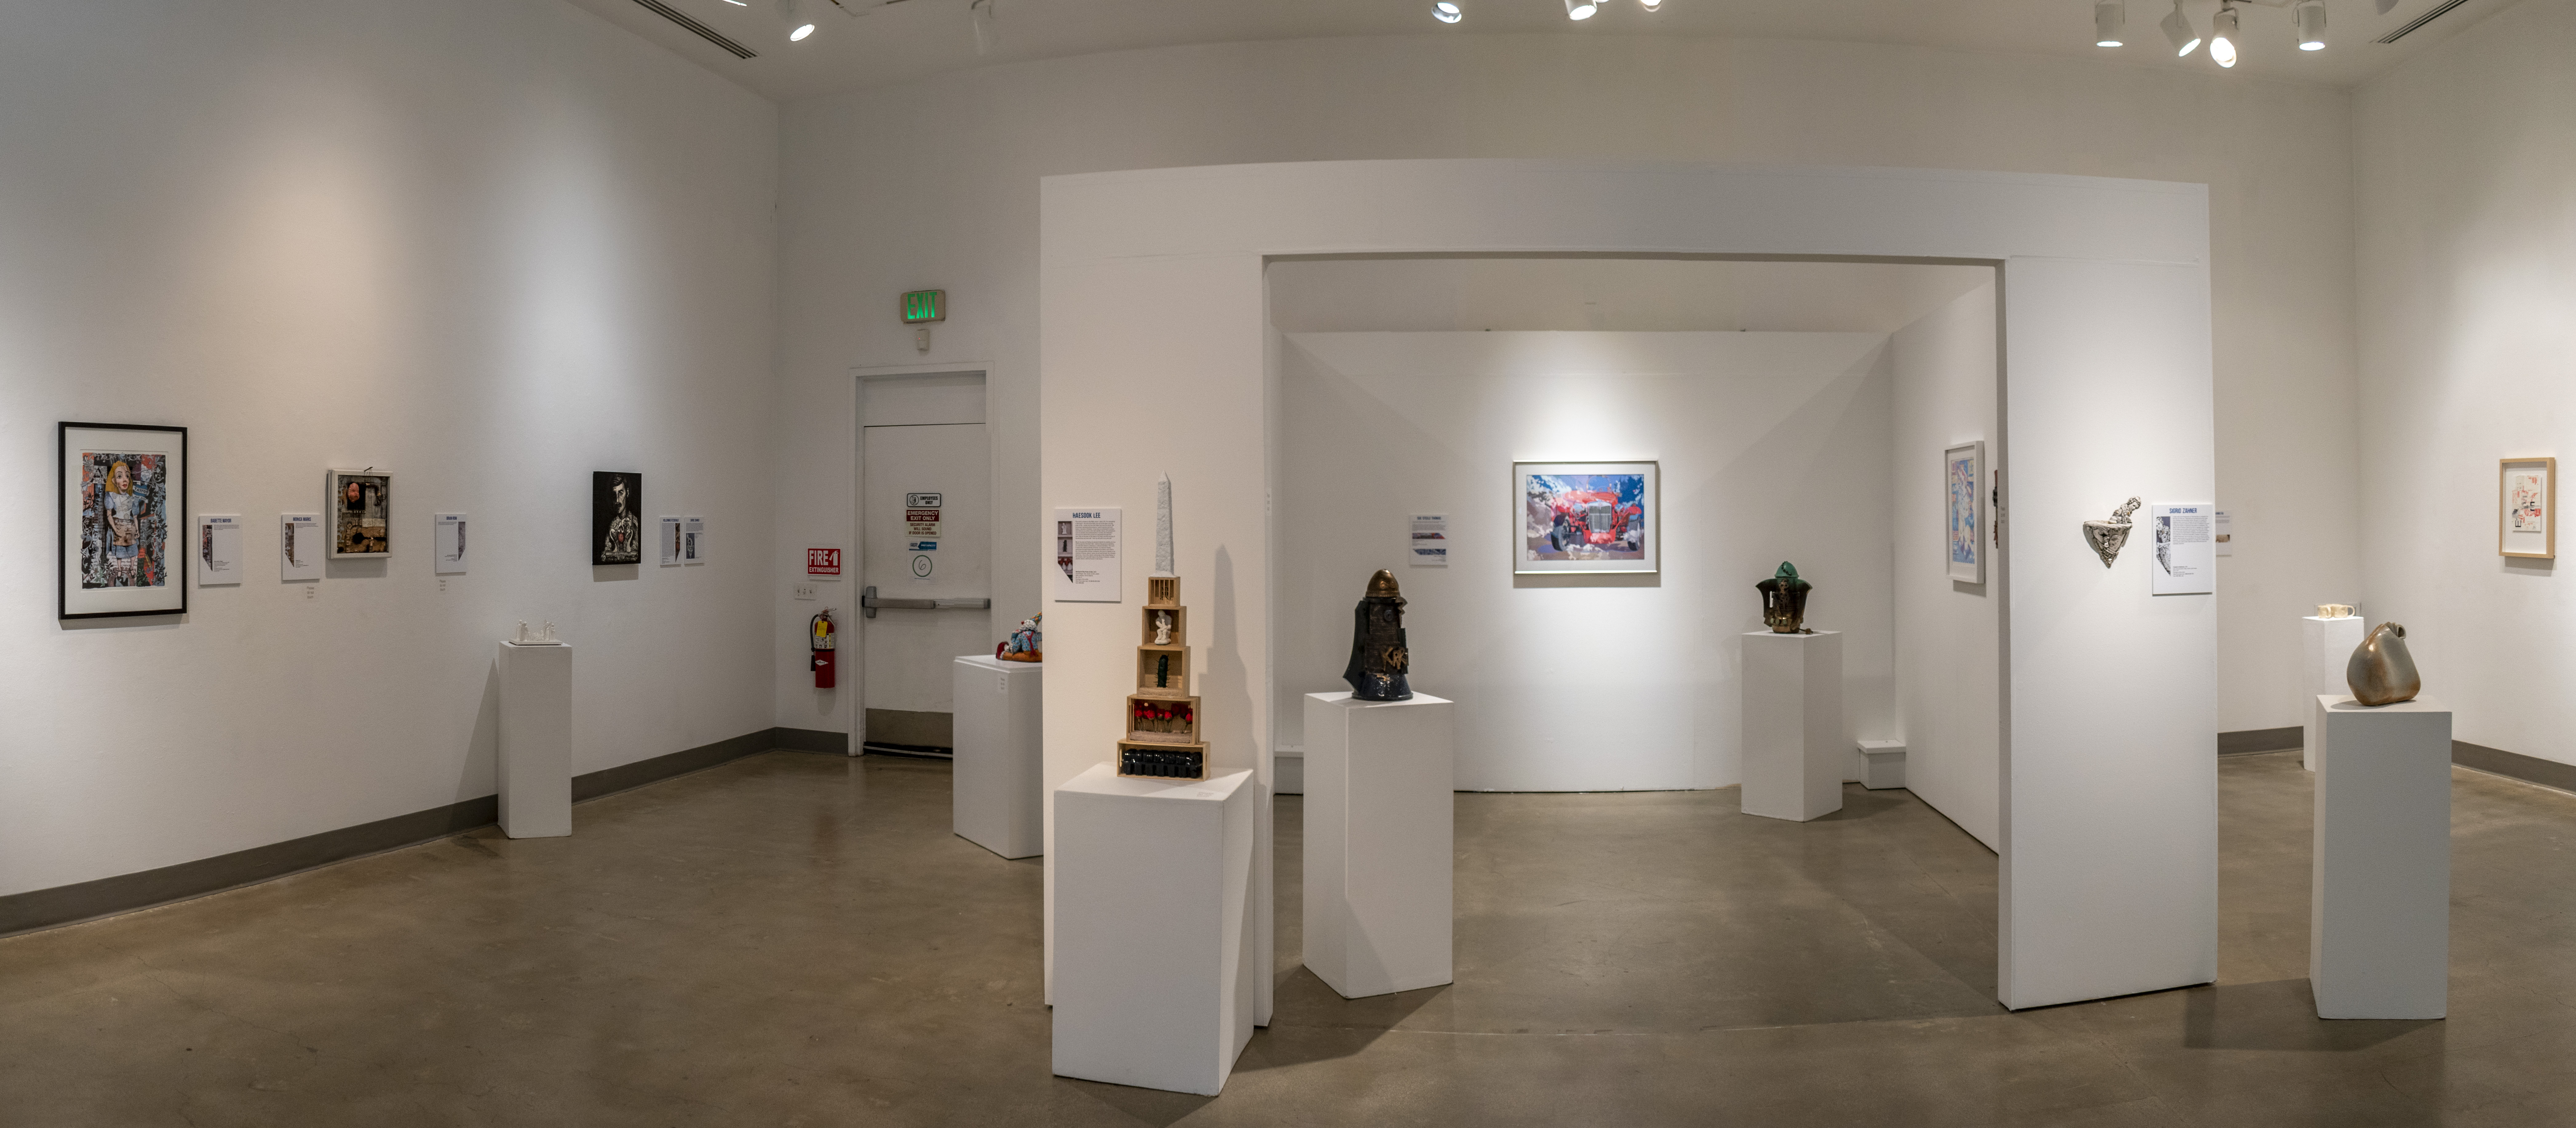 Installation View, West Gallery, "Ink & Clay 45" ,August 18, 2022 to November 17, 2022